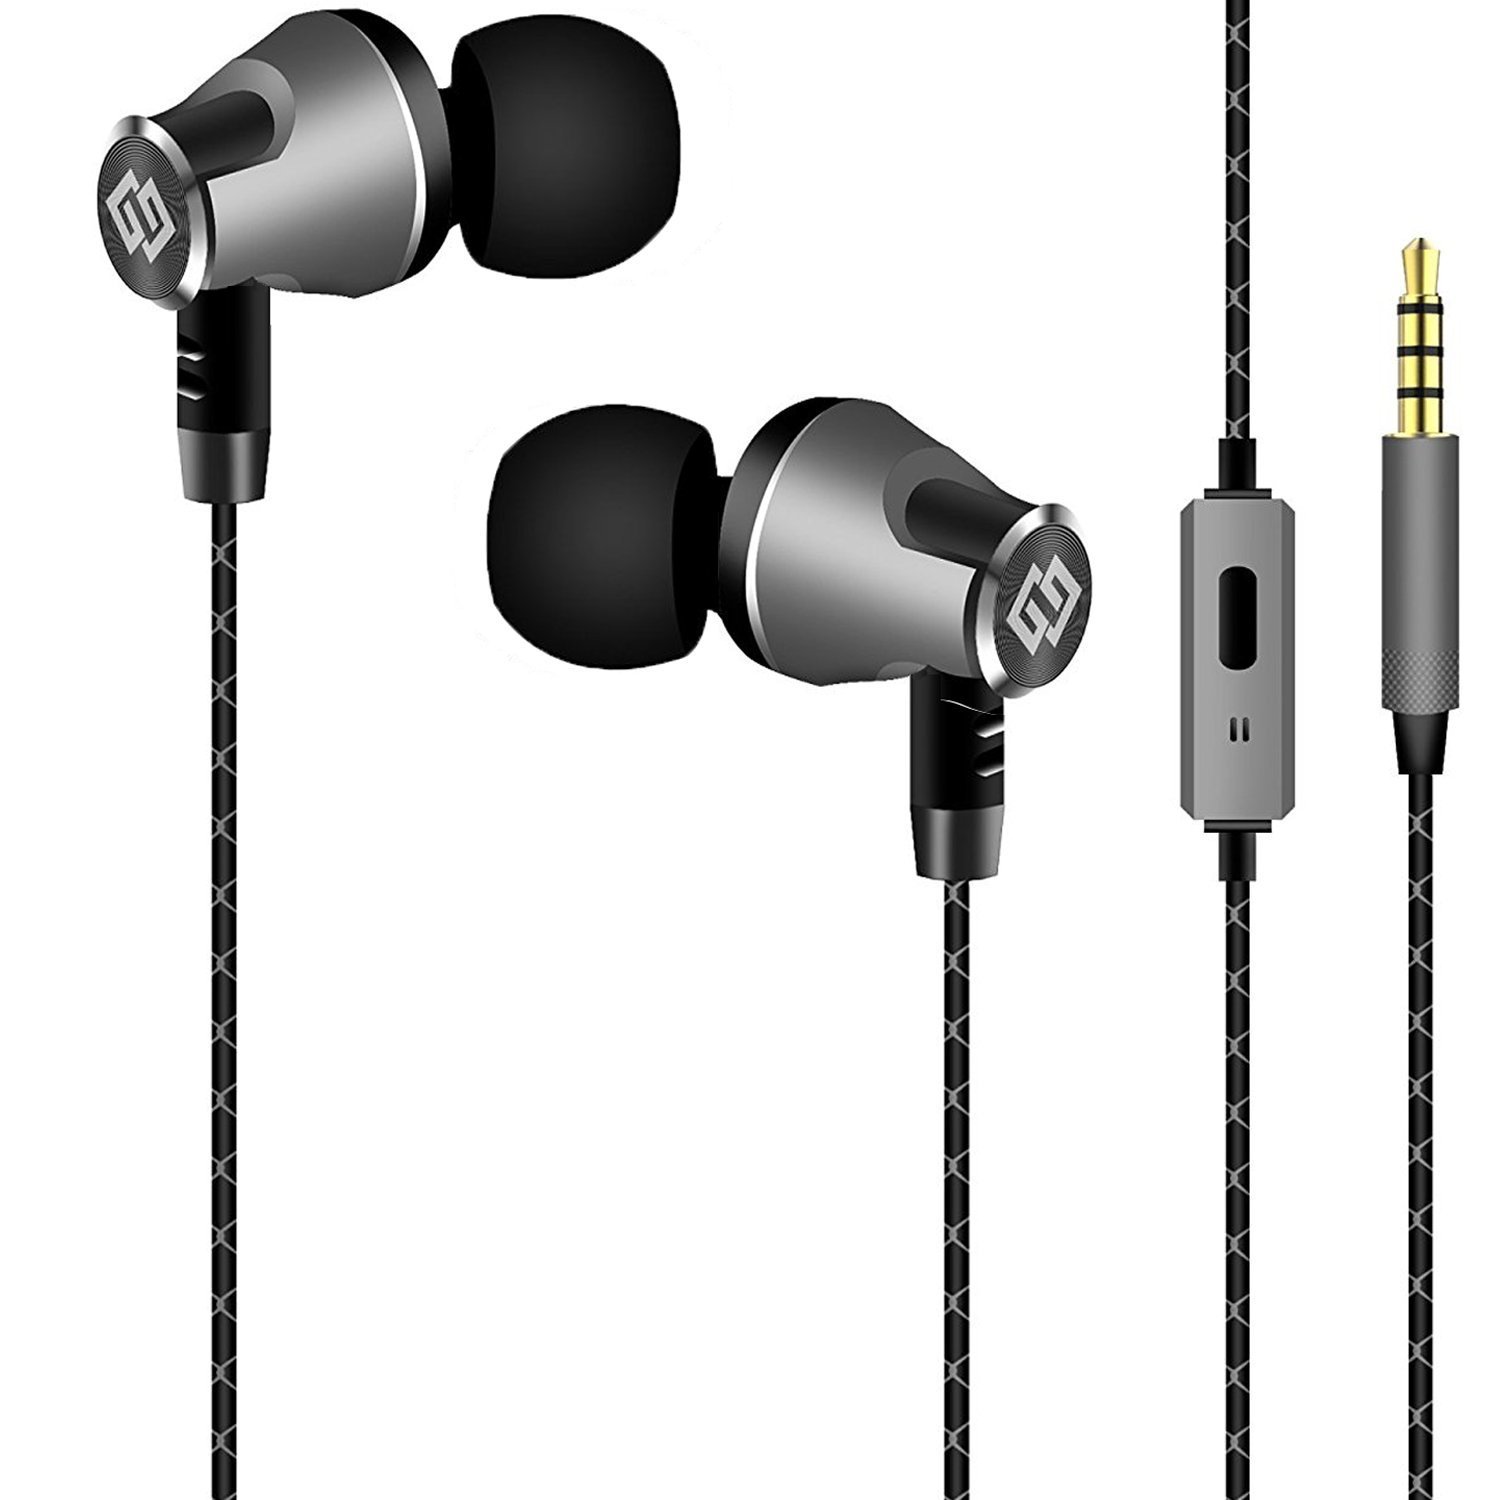 TAGG Metal Wired Earphone